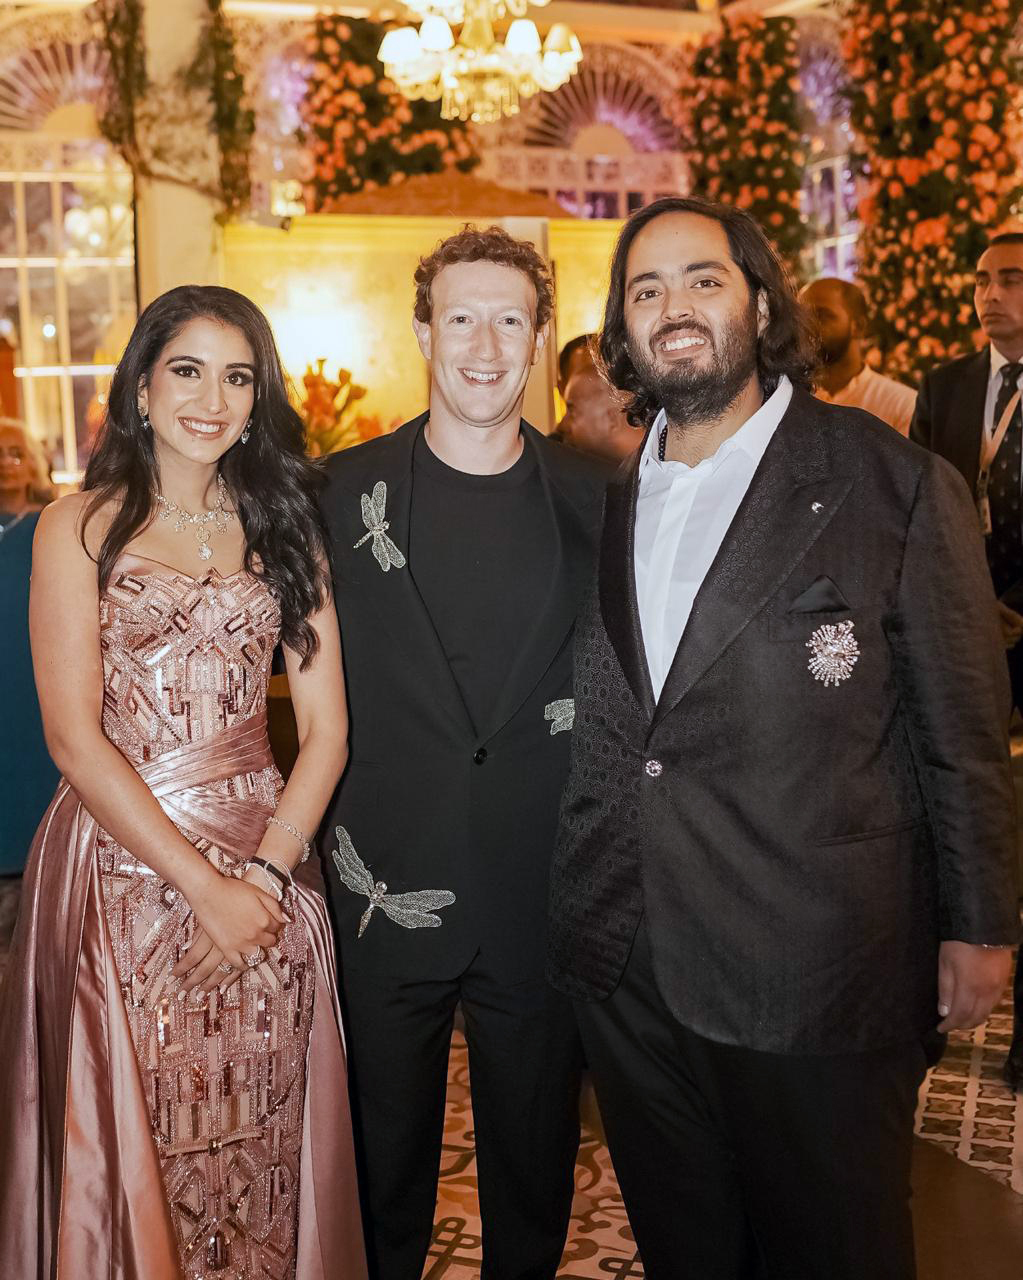 Mark Zuckerberg was among the recognisable faces at pre-wedding celebrations